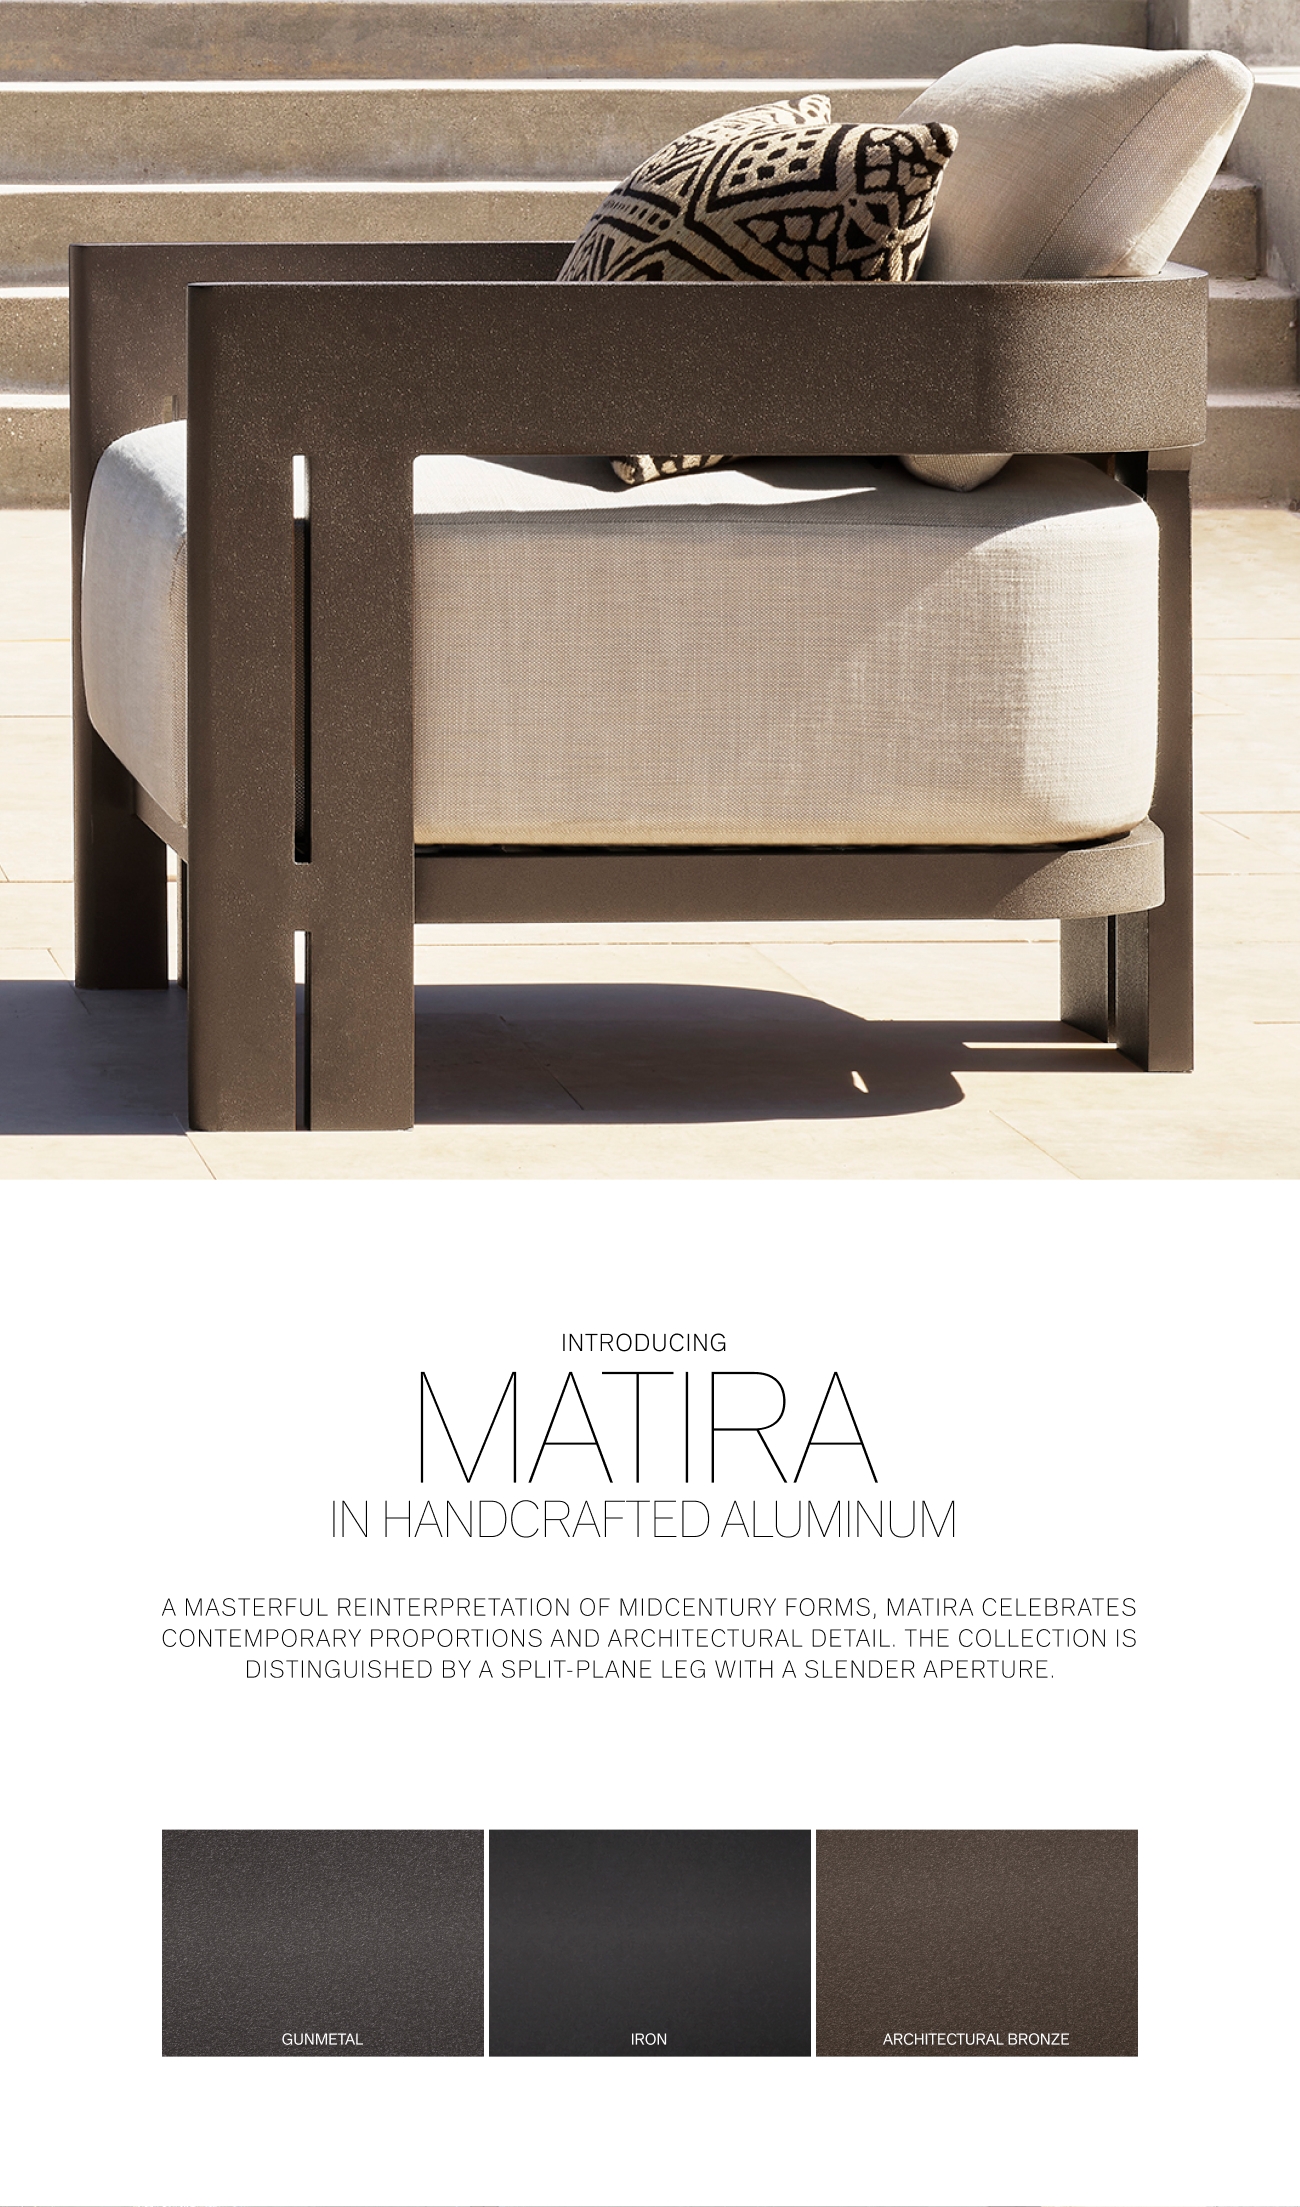  INTRODUCING MATTRA IN HANDCRAFTED ALUMINUM AMASTERFUL REINTERPRETATION OF MIDCENTURY FORMS, MATIRA CELEBRATES CONTEMPORARY PROPORTIONS AND ARCHITECTURAL DETAIL. THE COLLECTION IS DISTINGUISHED BY A SPLIT-PLANE LEG WITH A SLENDER APERTURE. GUNMETAL IRON ARCHITECTURAL BRONZE 